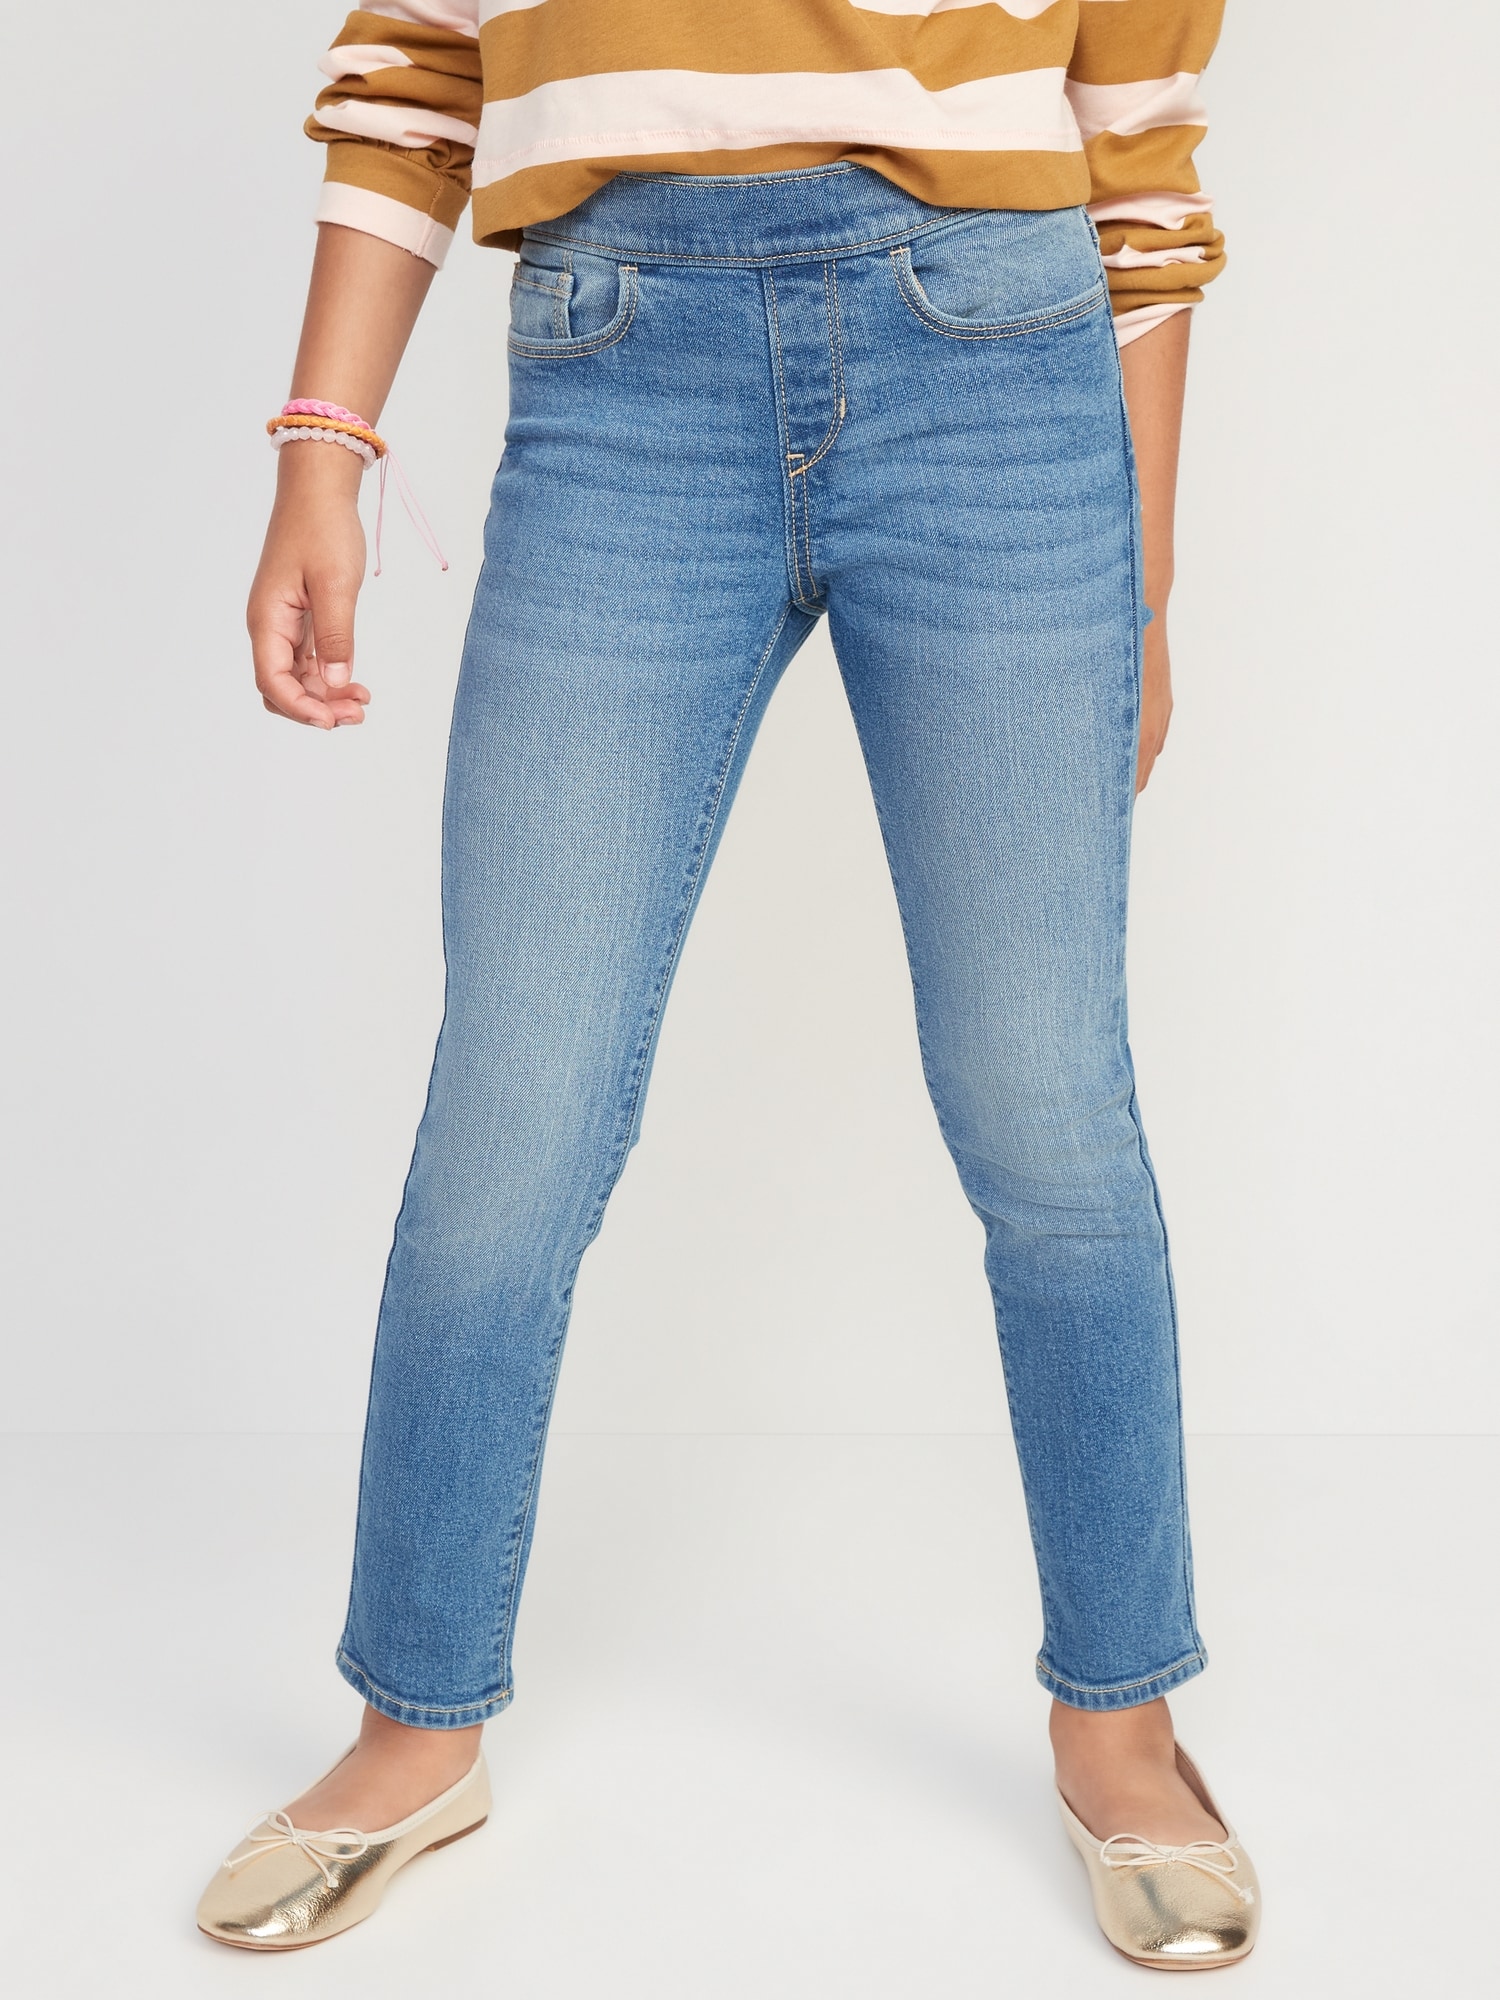 Old Navy Girls Wow Skinny Pull-On Jeans (Light Wash)